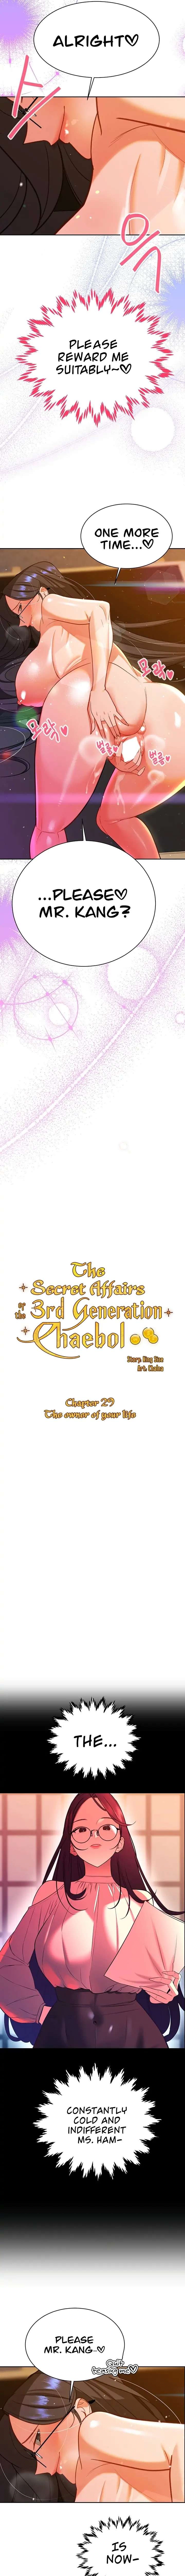 The Secret Affairs Of The 3Rd Generation Chaebol - Page 2